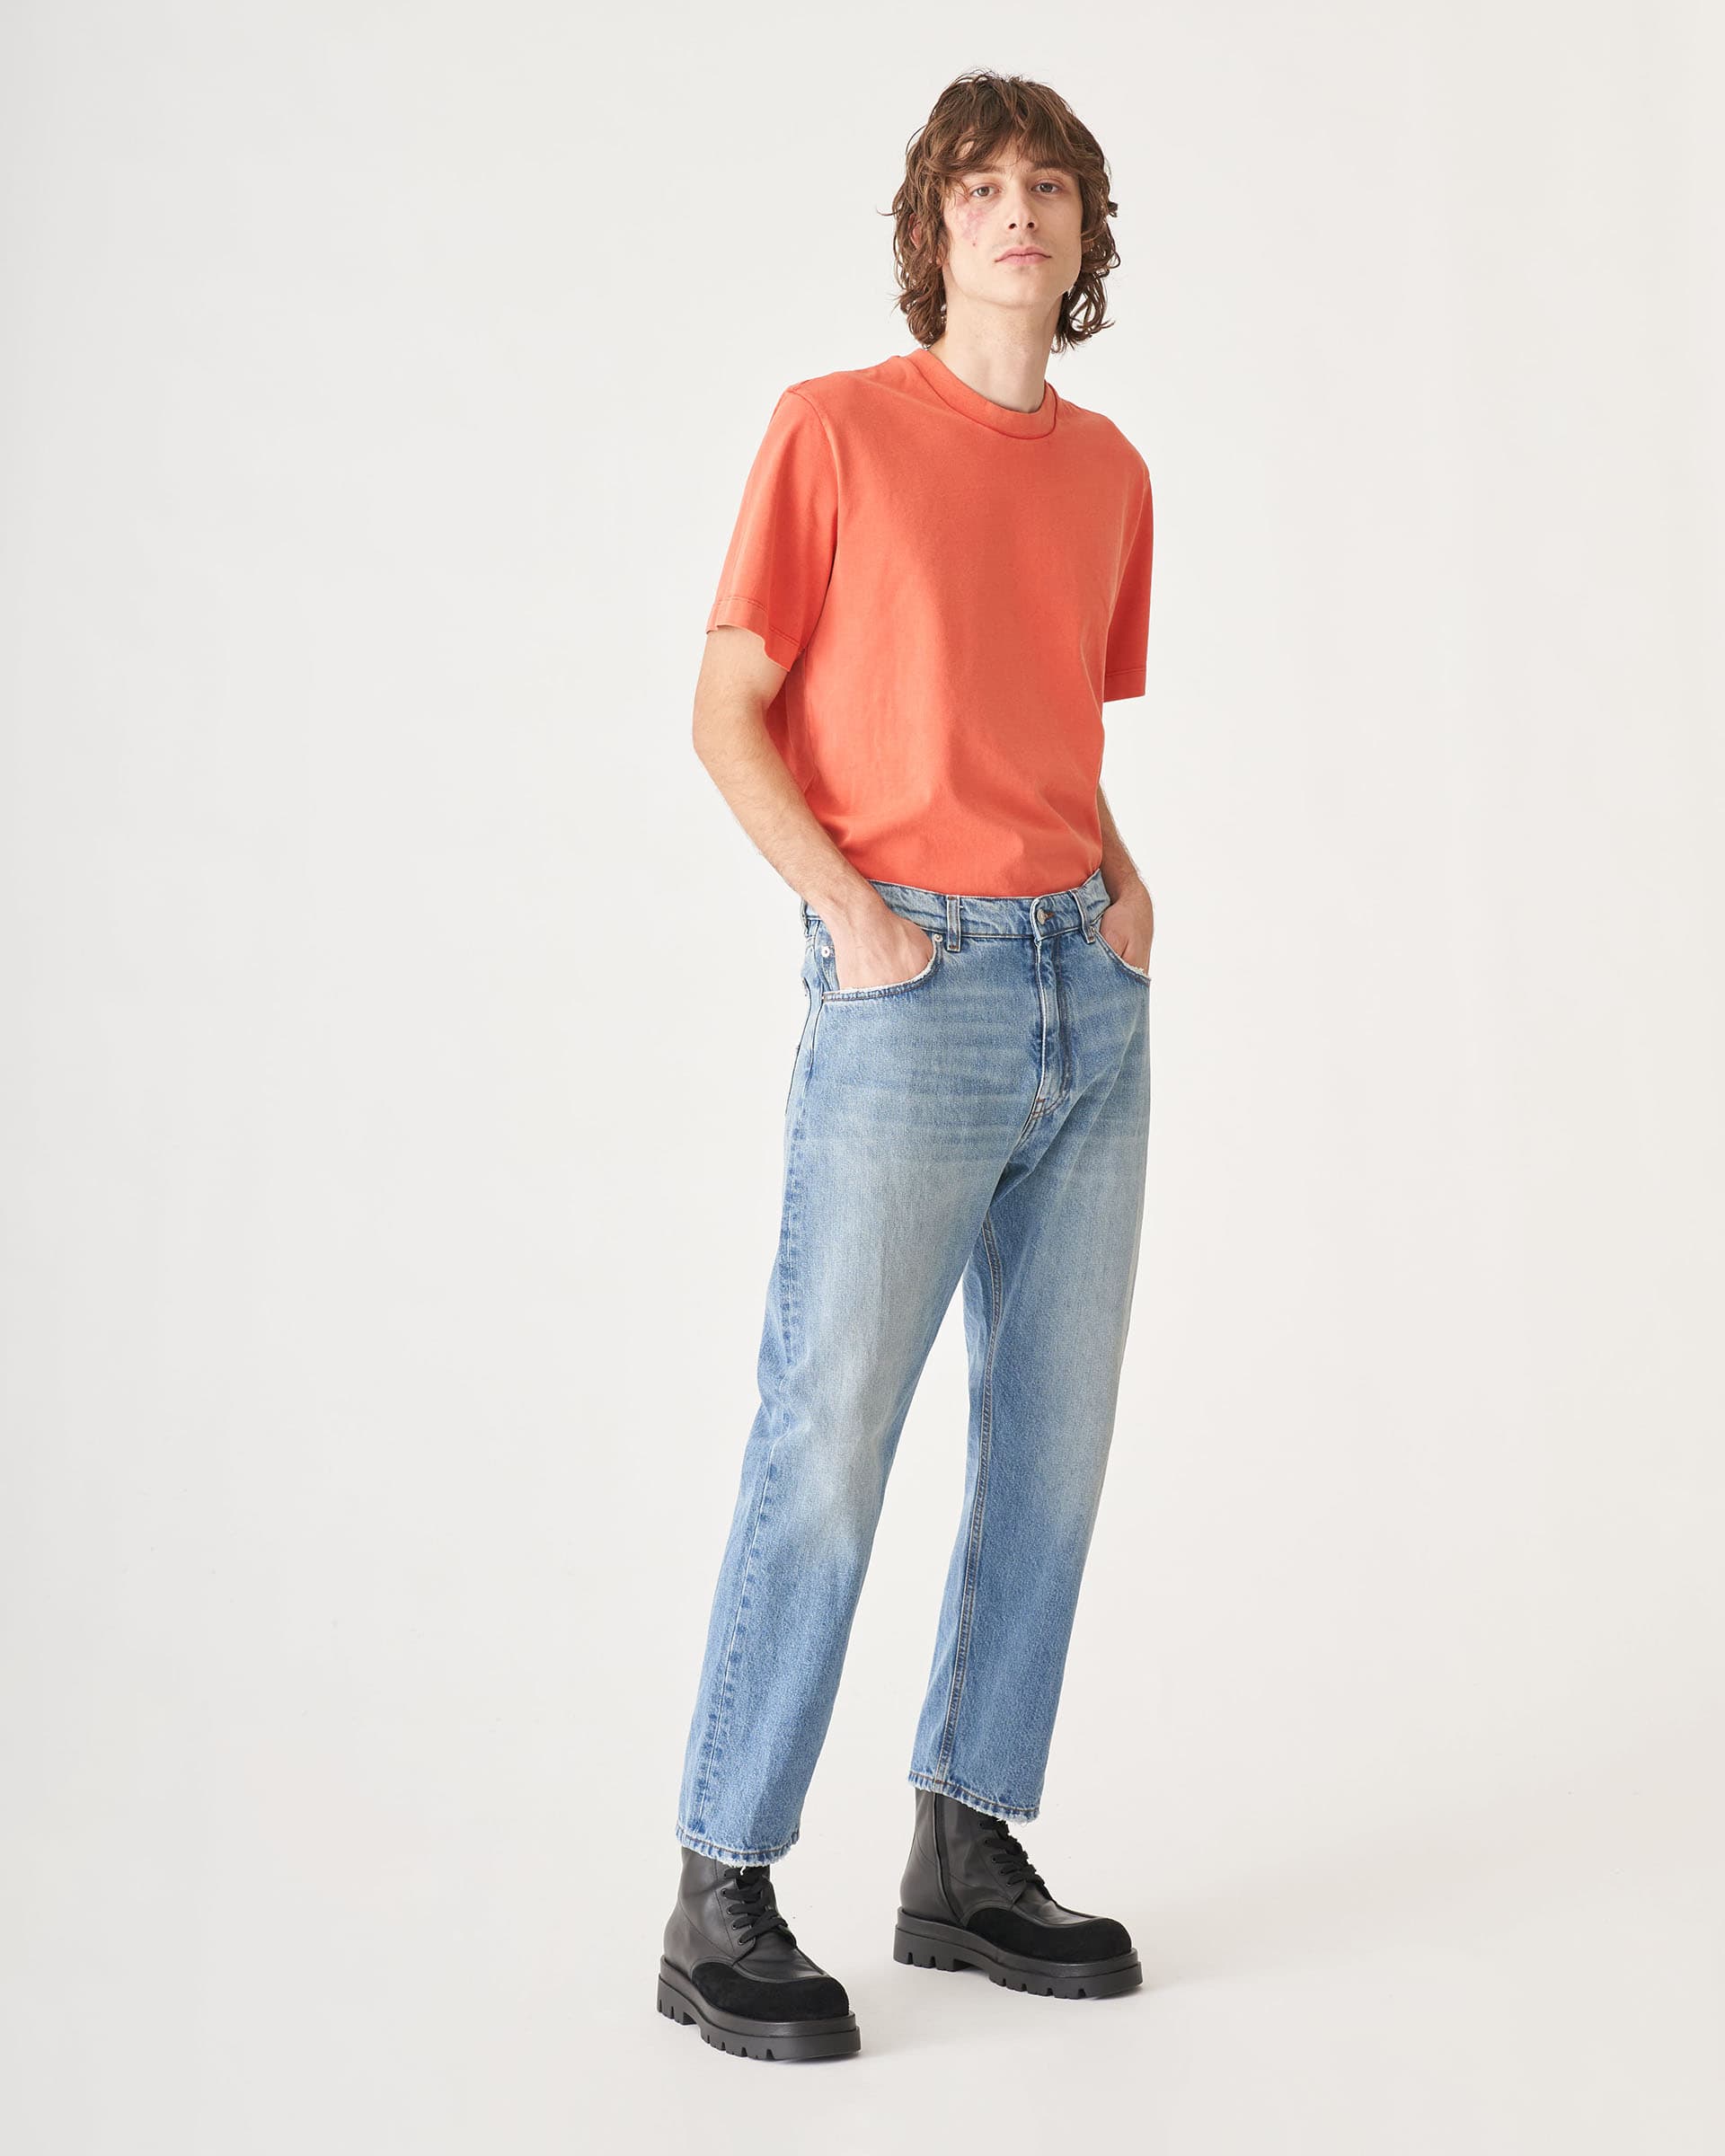 The Market Store | Arrow Trousers 5 Pockets